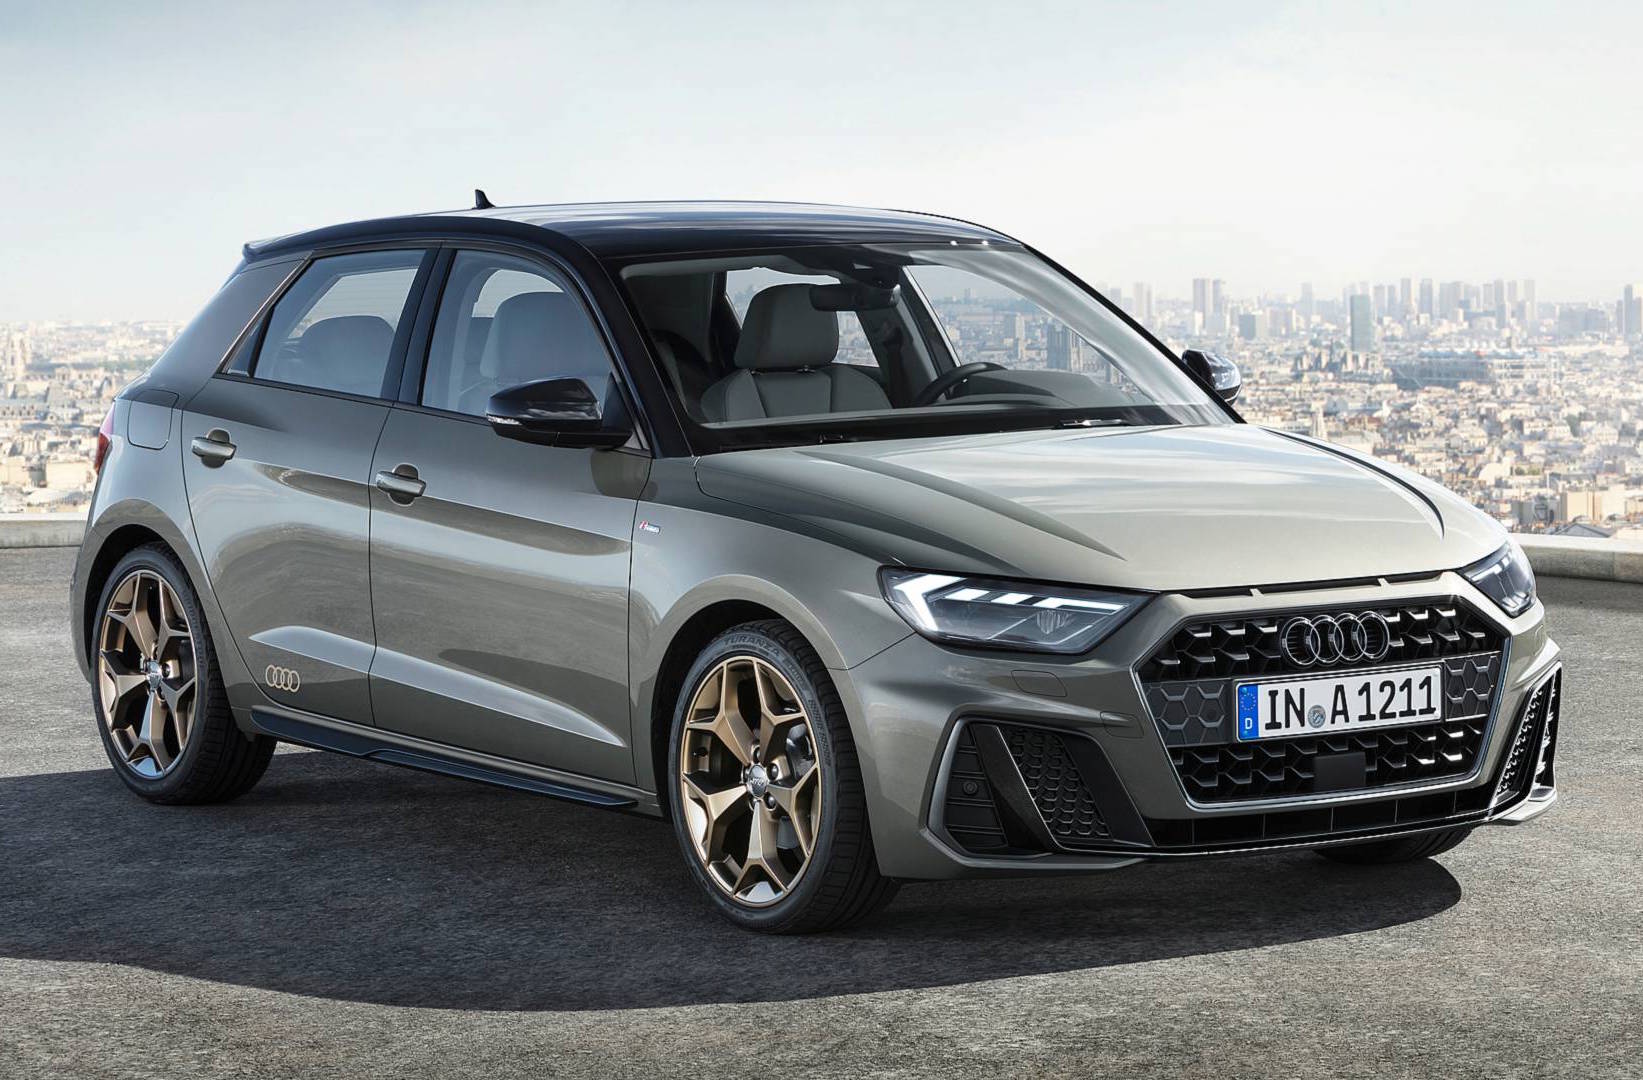 2019 Audi A1 Sportback revealed; awesome design, jumps to ...